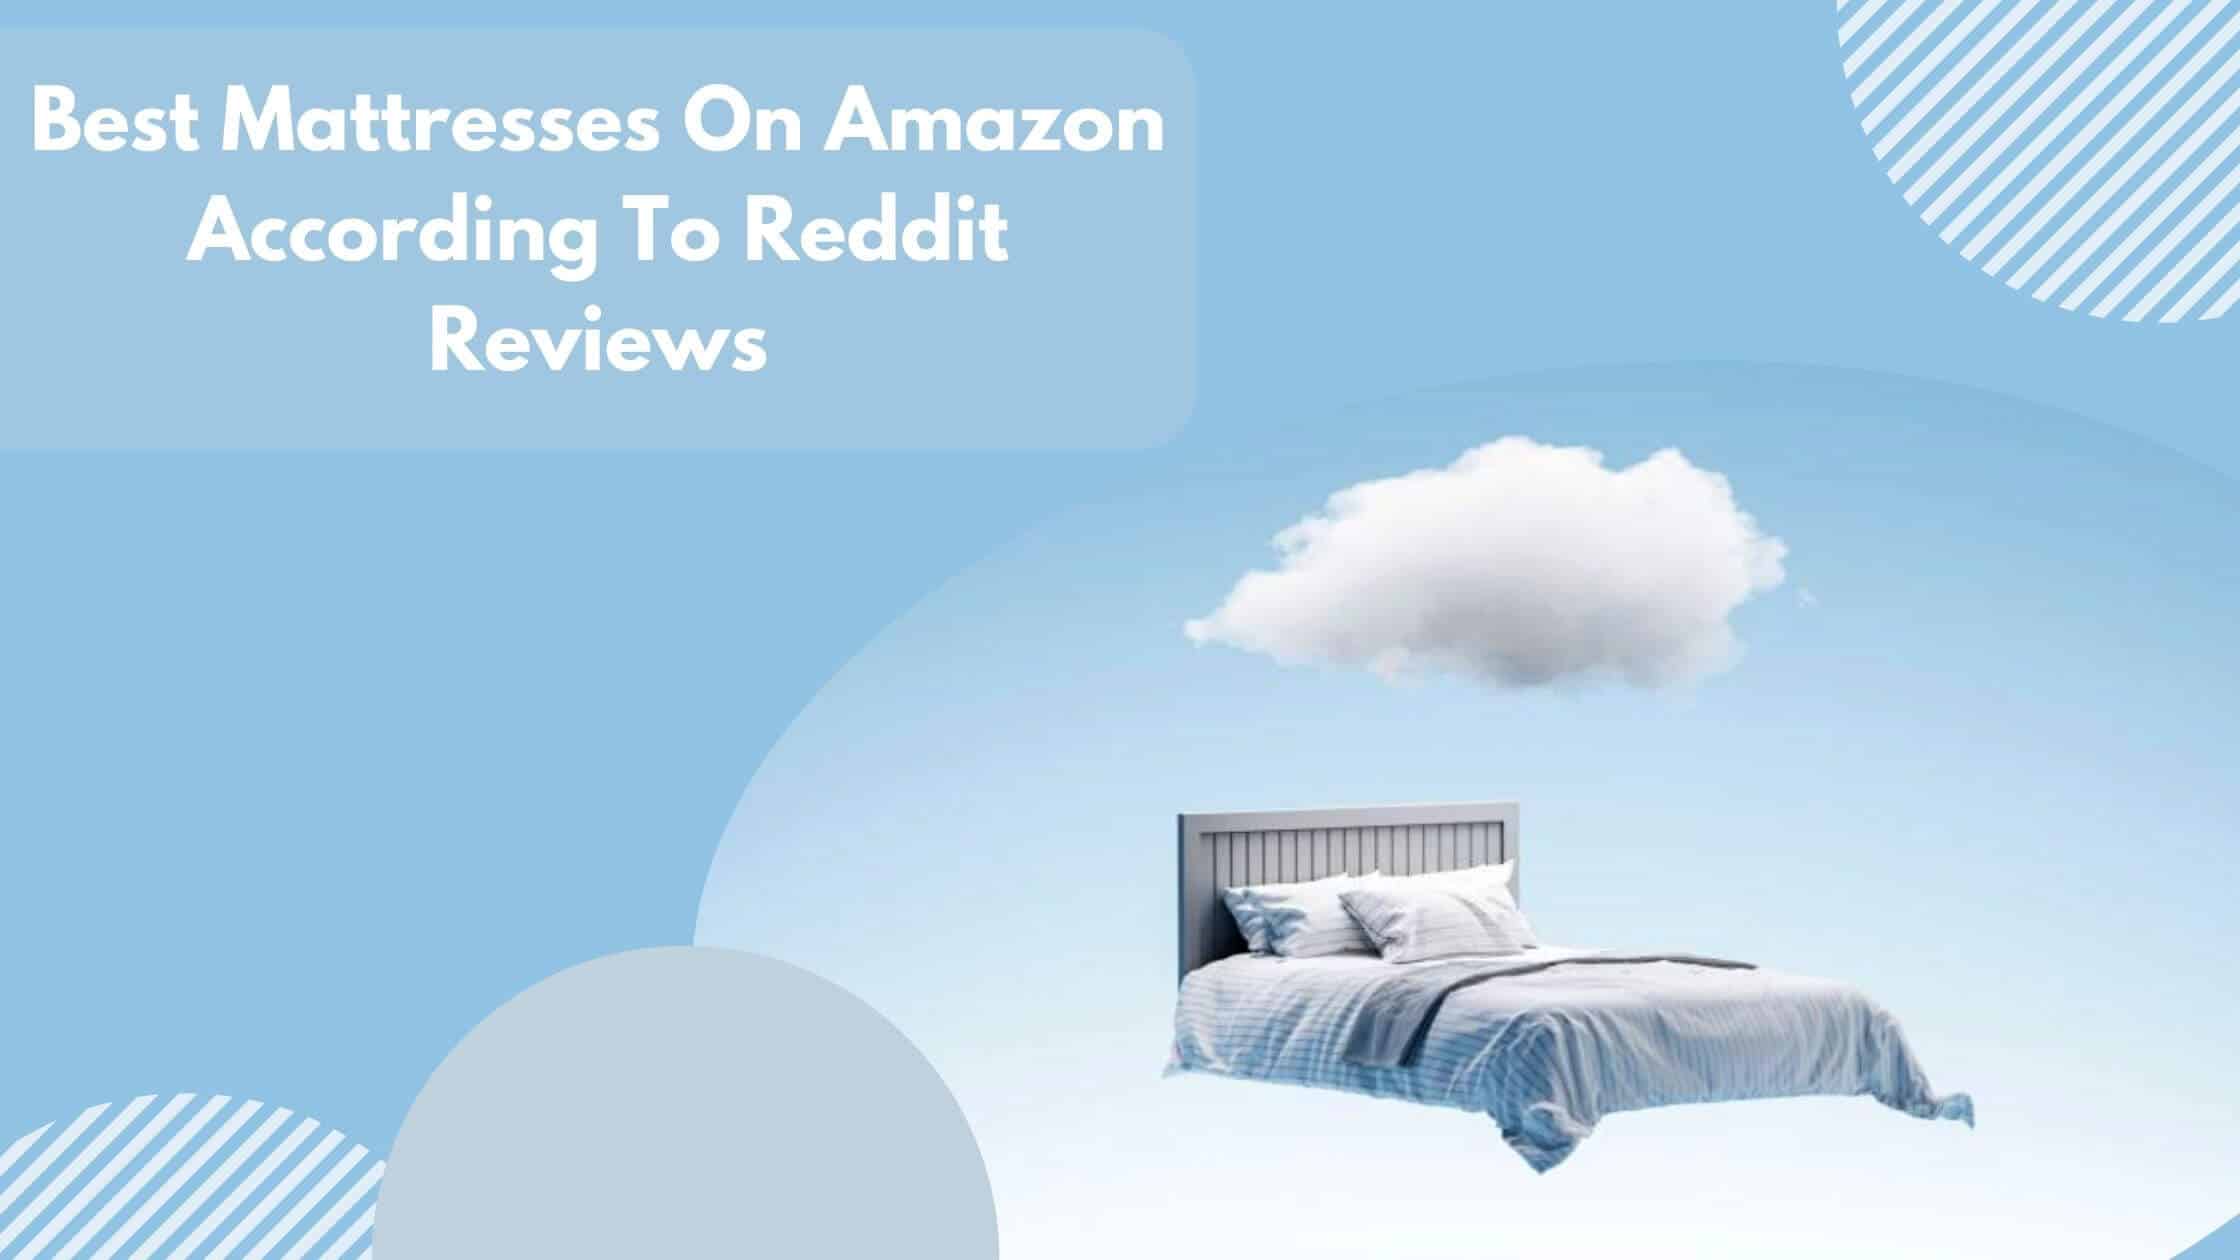 Best Mattresses On Amazon According To Reddit Reviews